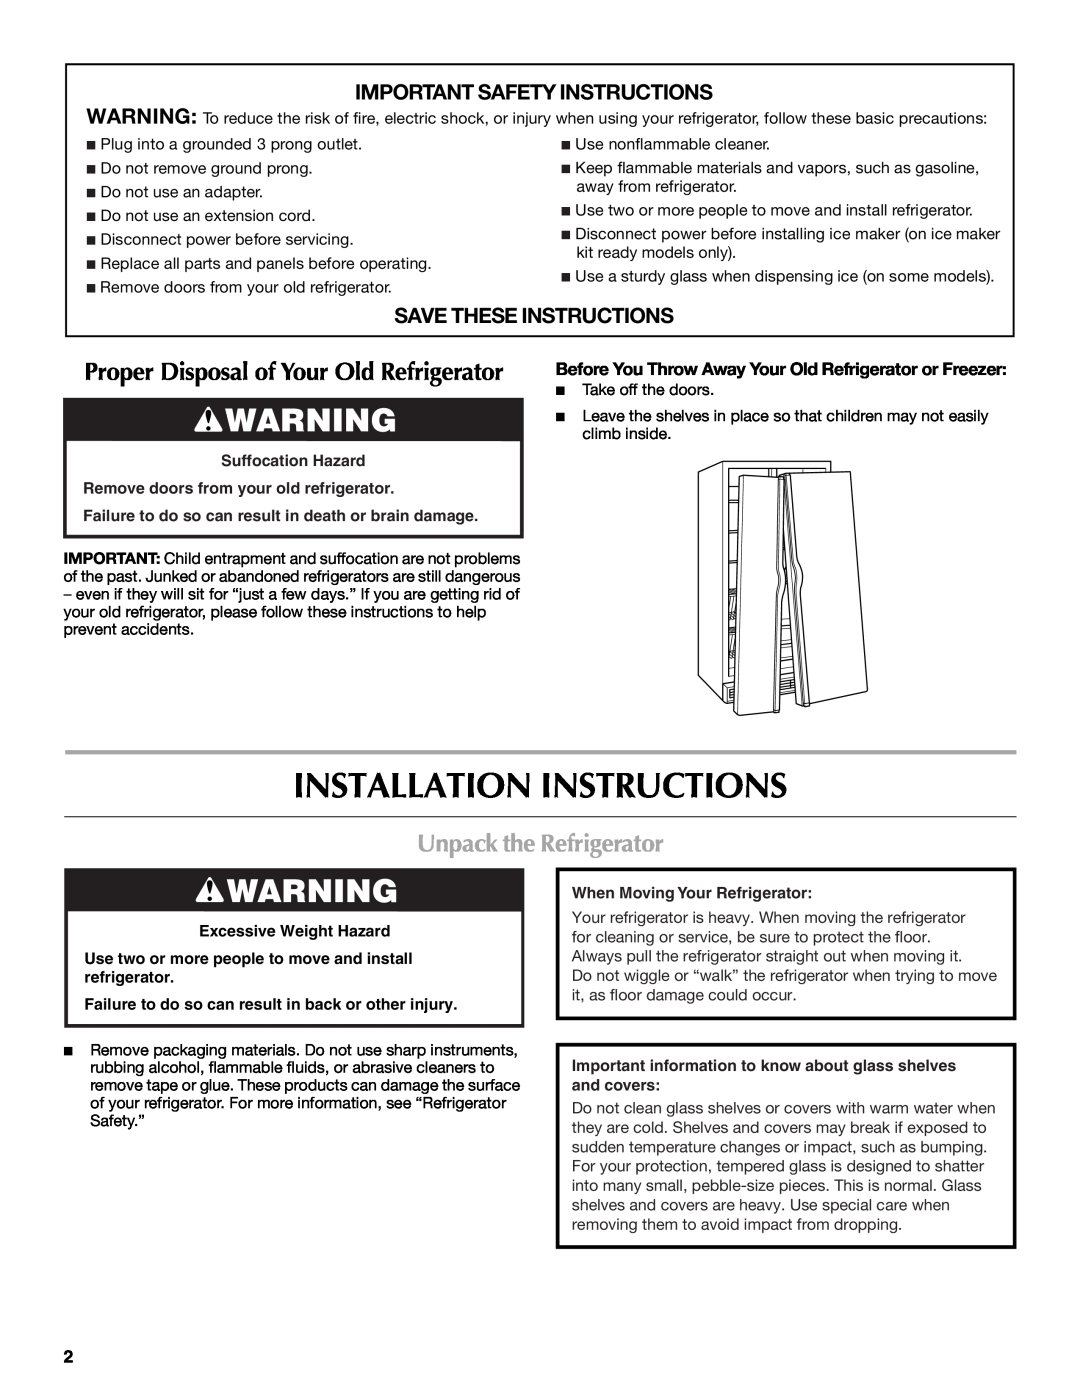 Maytag MSD2254VEW Installation Instructions, Unpack the Refrigerator, Important Safety Instructions, Suffocation Hazard 